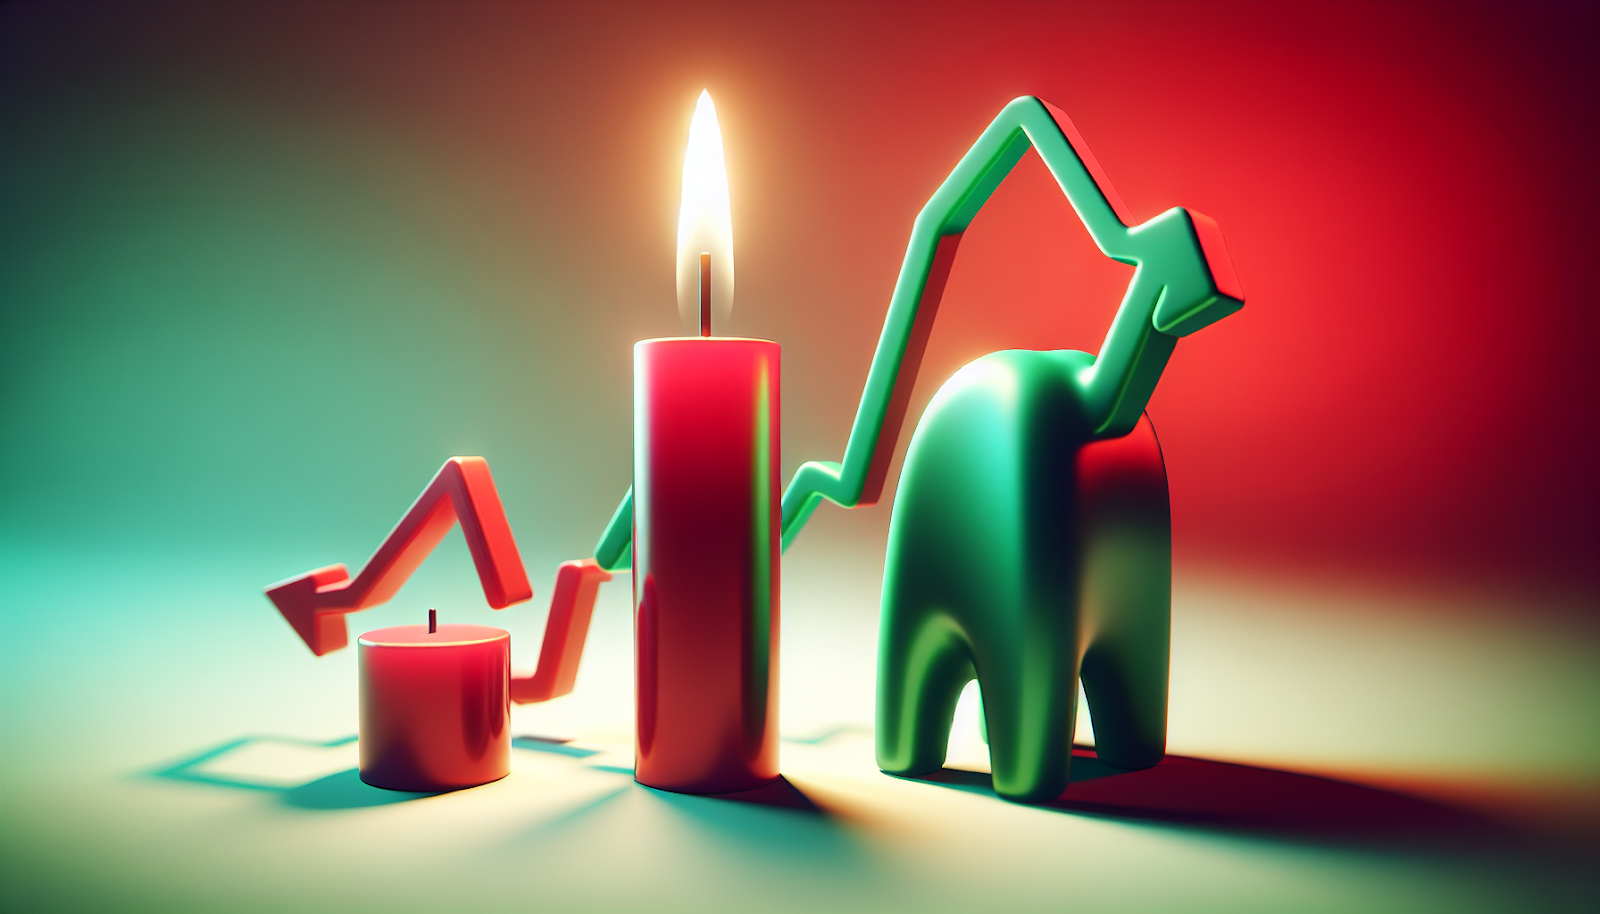 A literal display of the bullish engulfing pattern as red and green candles.